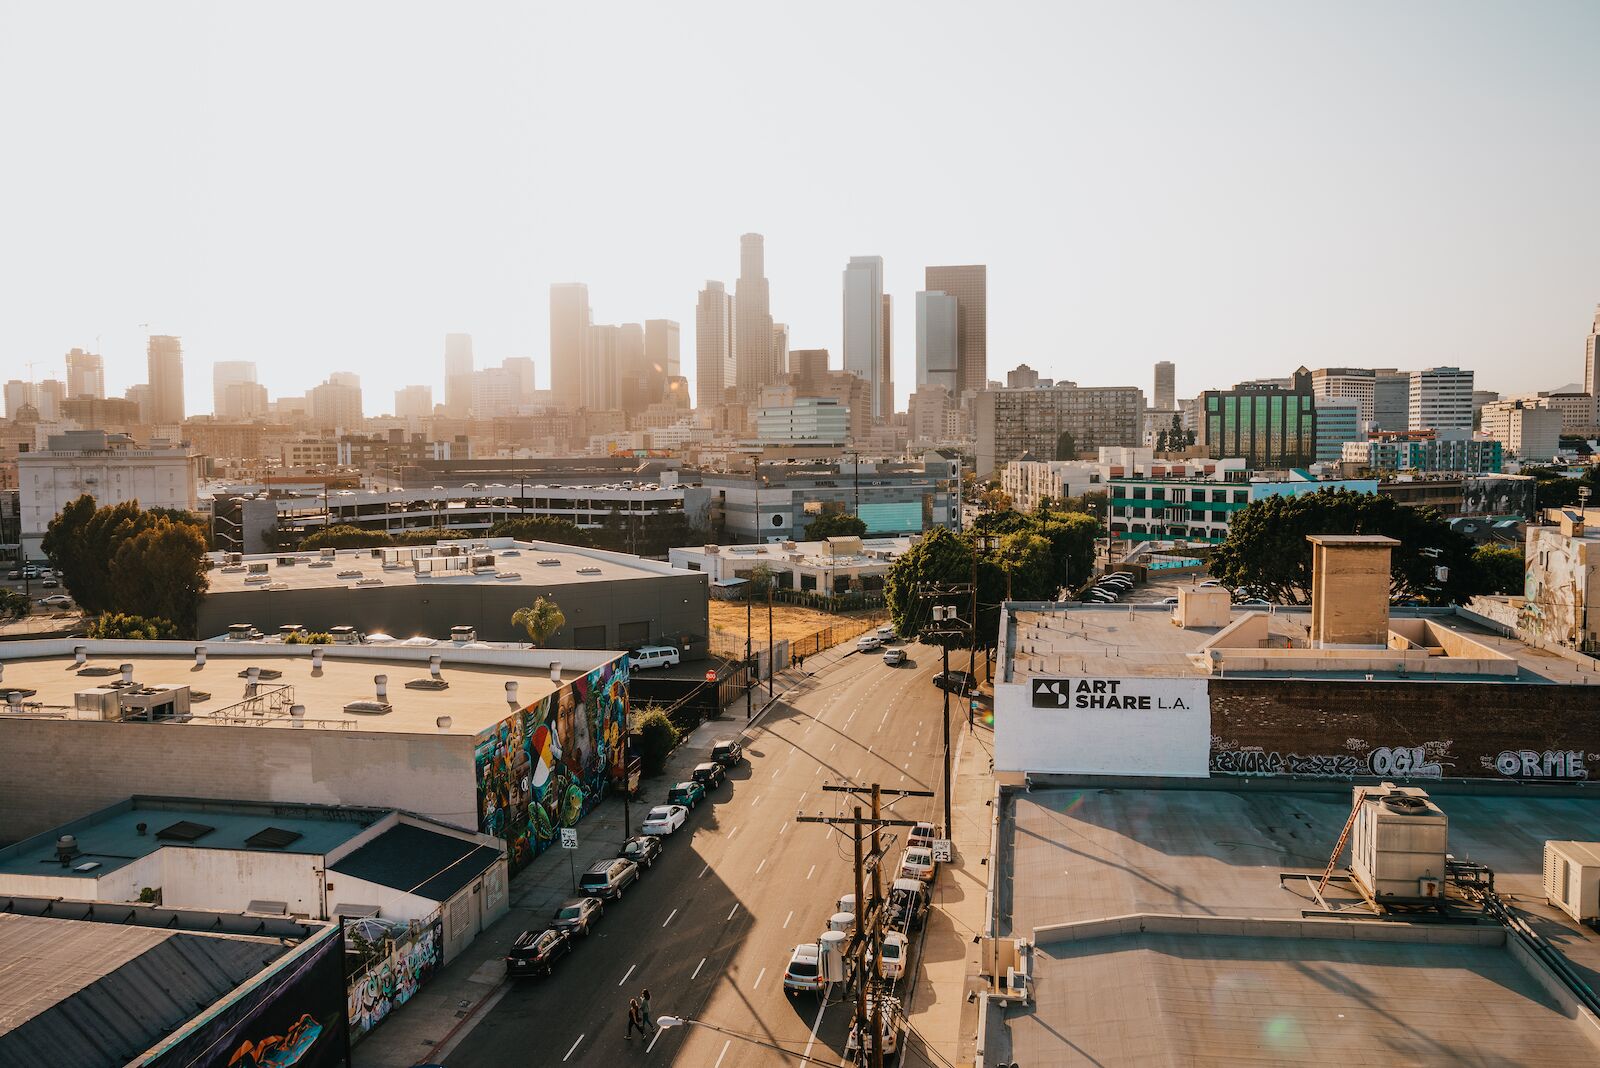 Visiting the Downtown Art District is one of the best things to do in Los Angeles